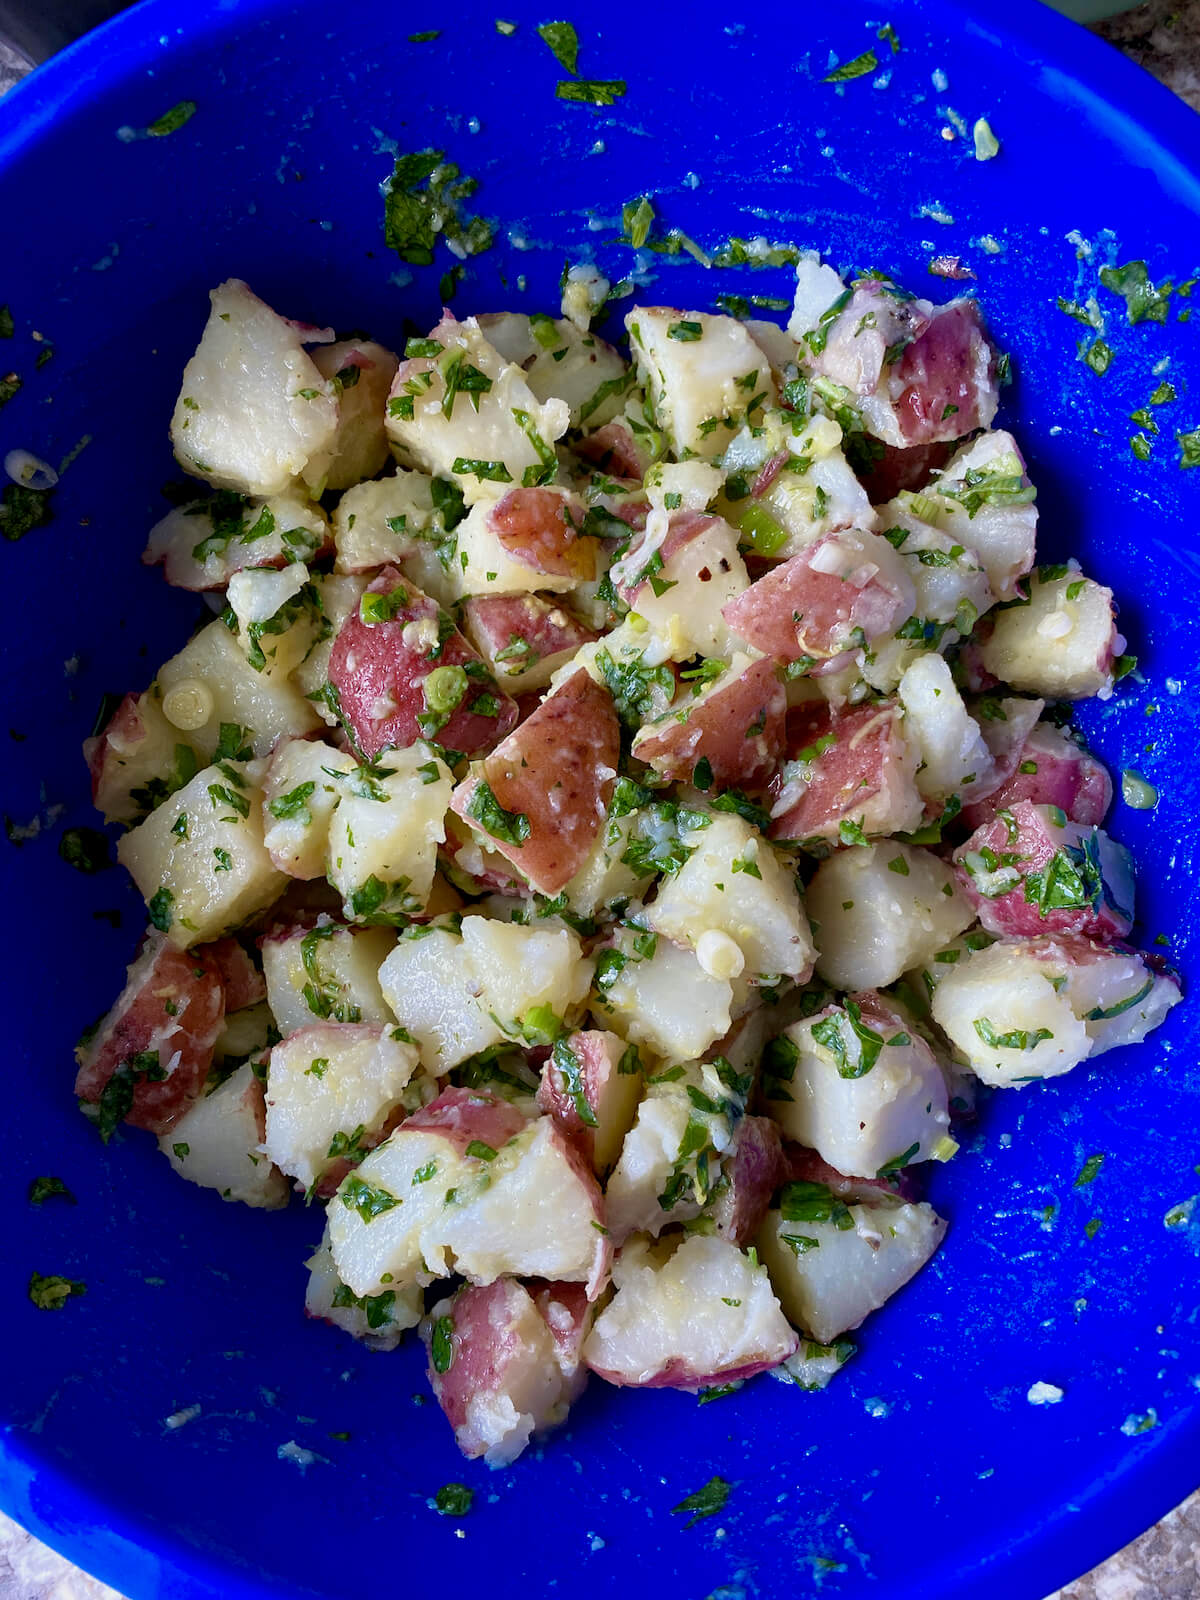 The finished herbed potato salad in a blue mixing bowl.